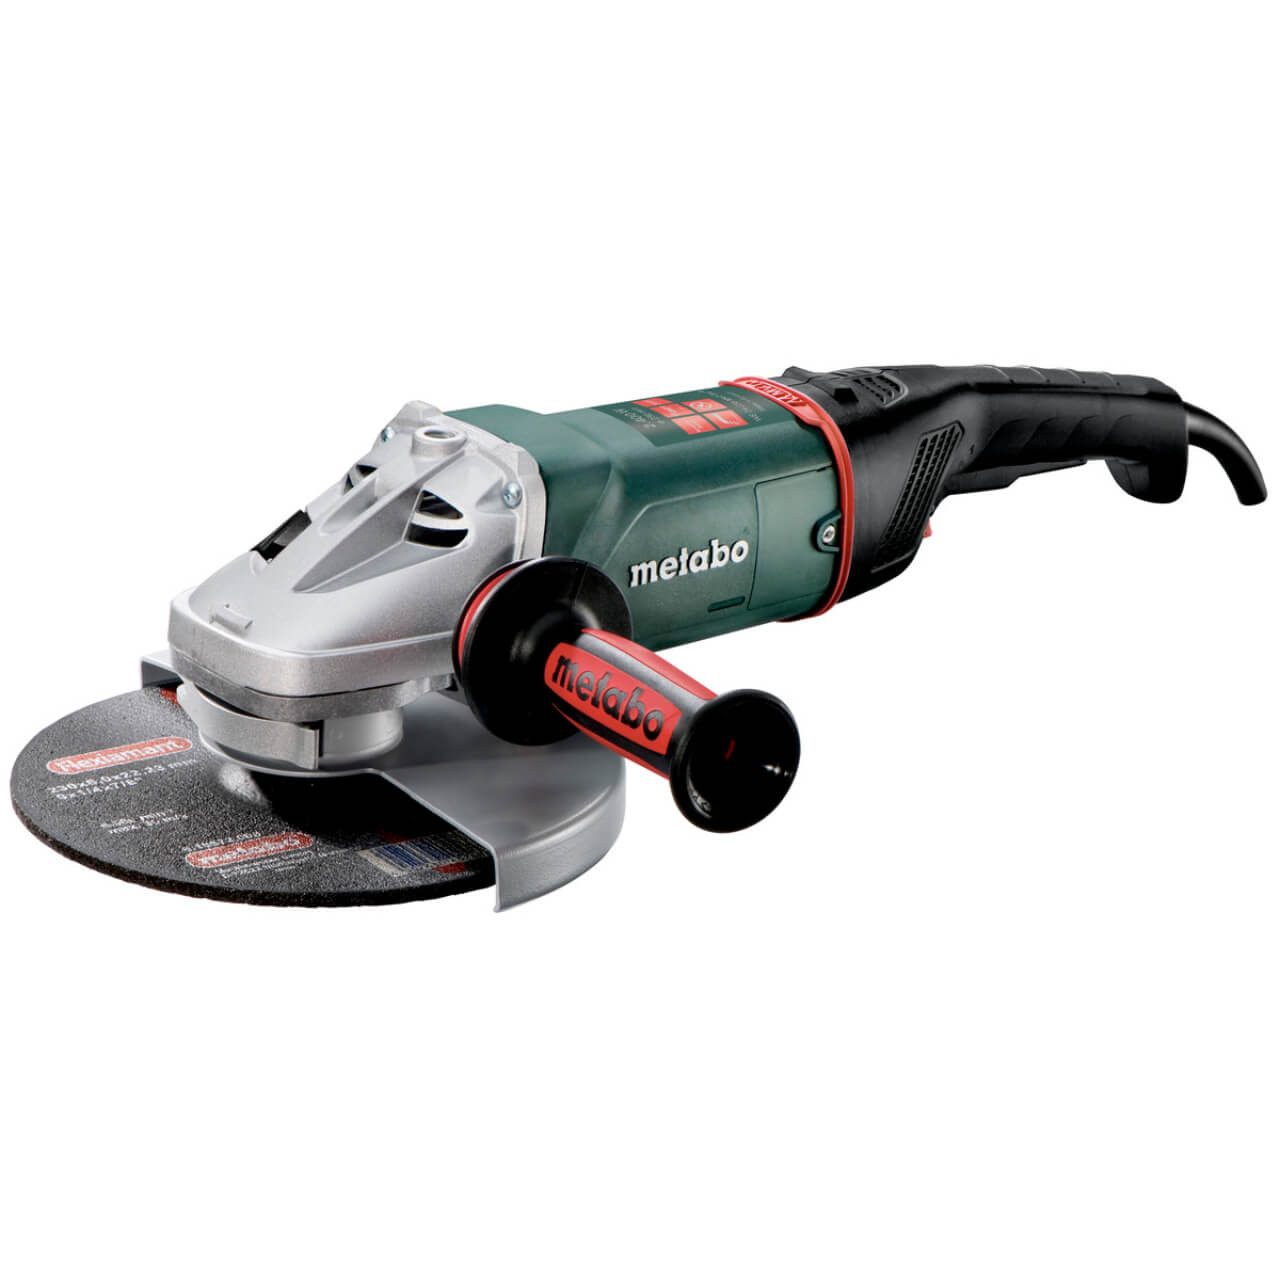 Metabo WE 24-230 MVT QUICK Angle Grinder 230mm 2400W Rat Tail Rotating Back Handle